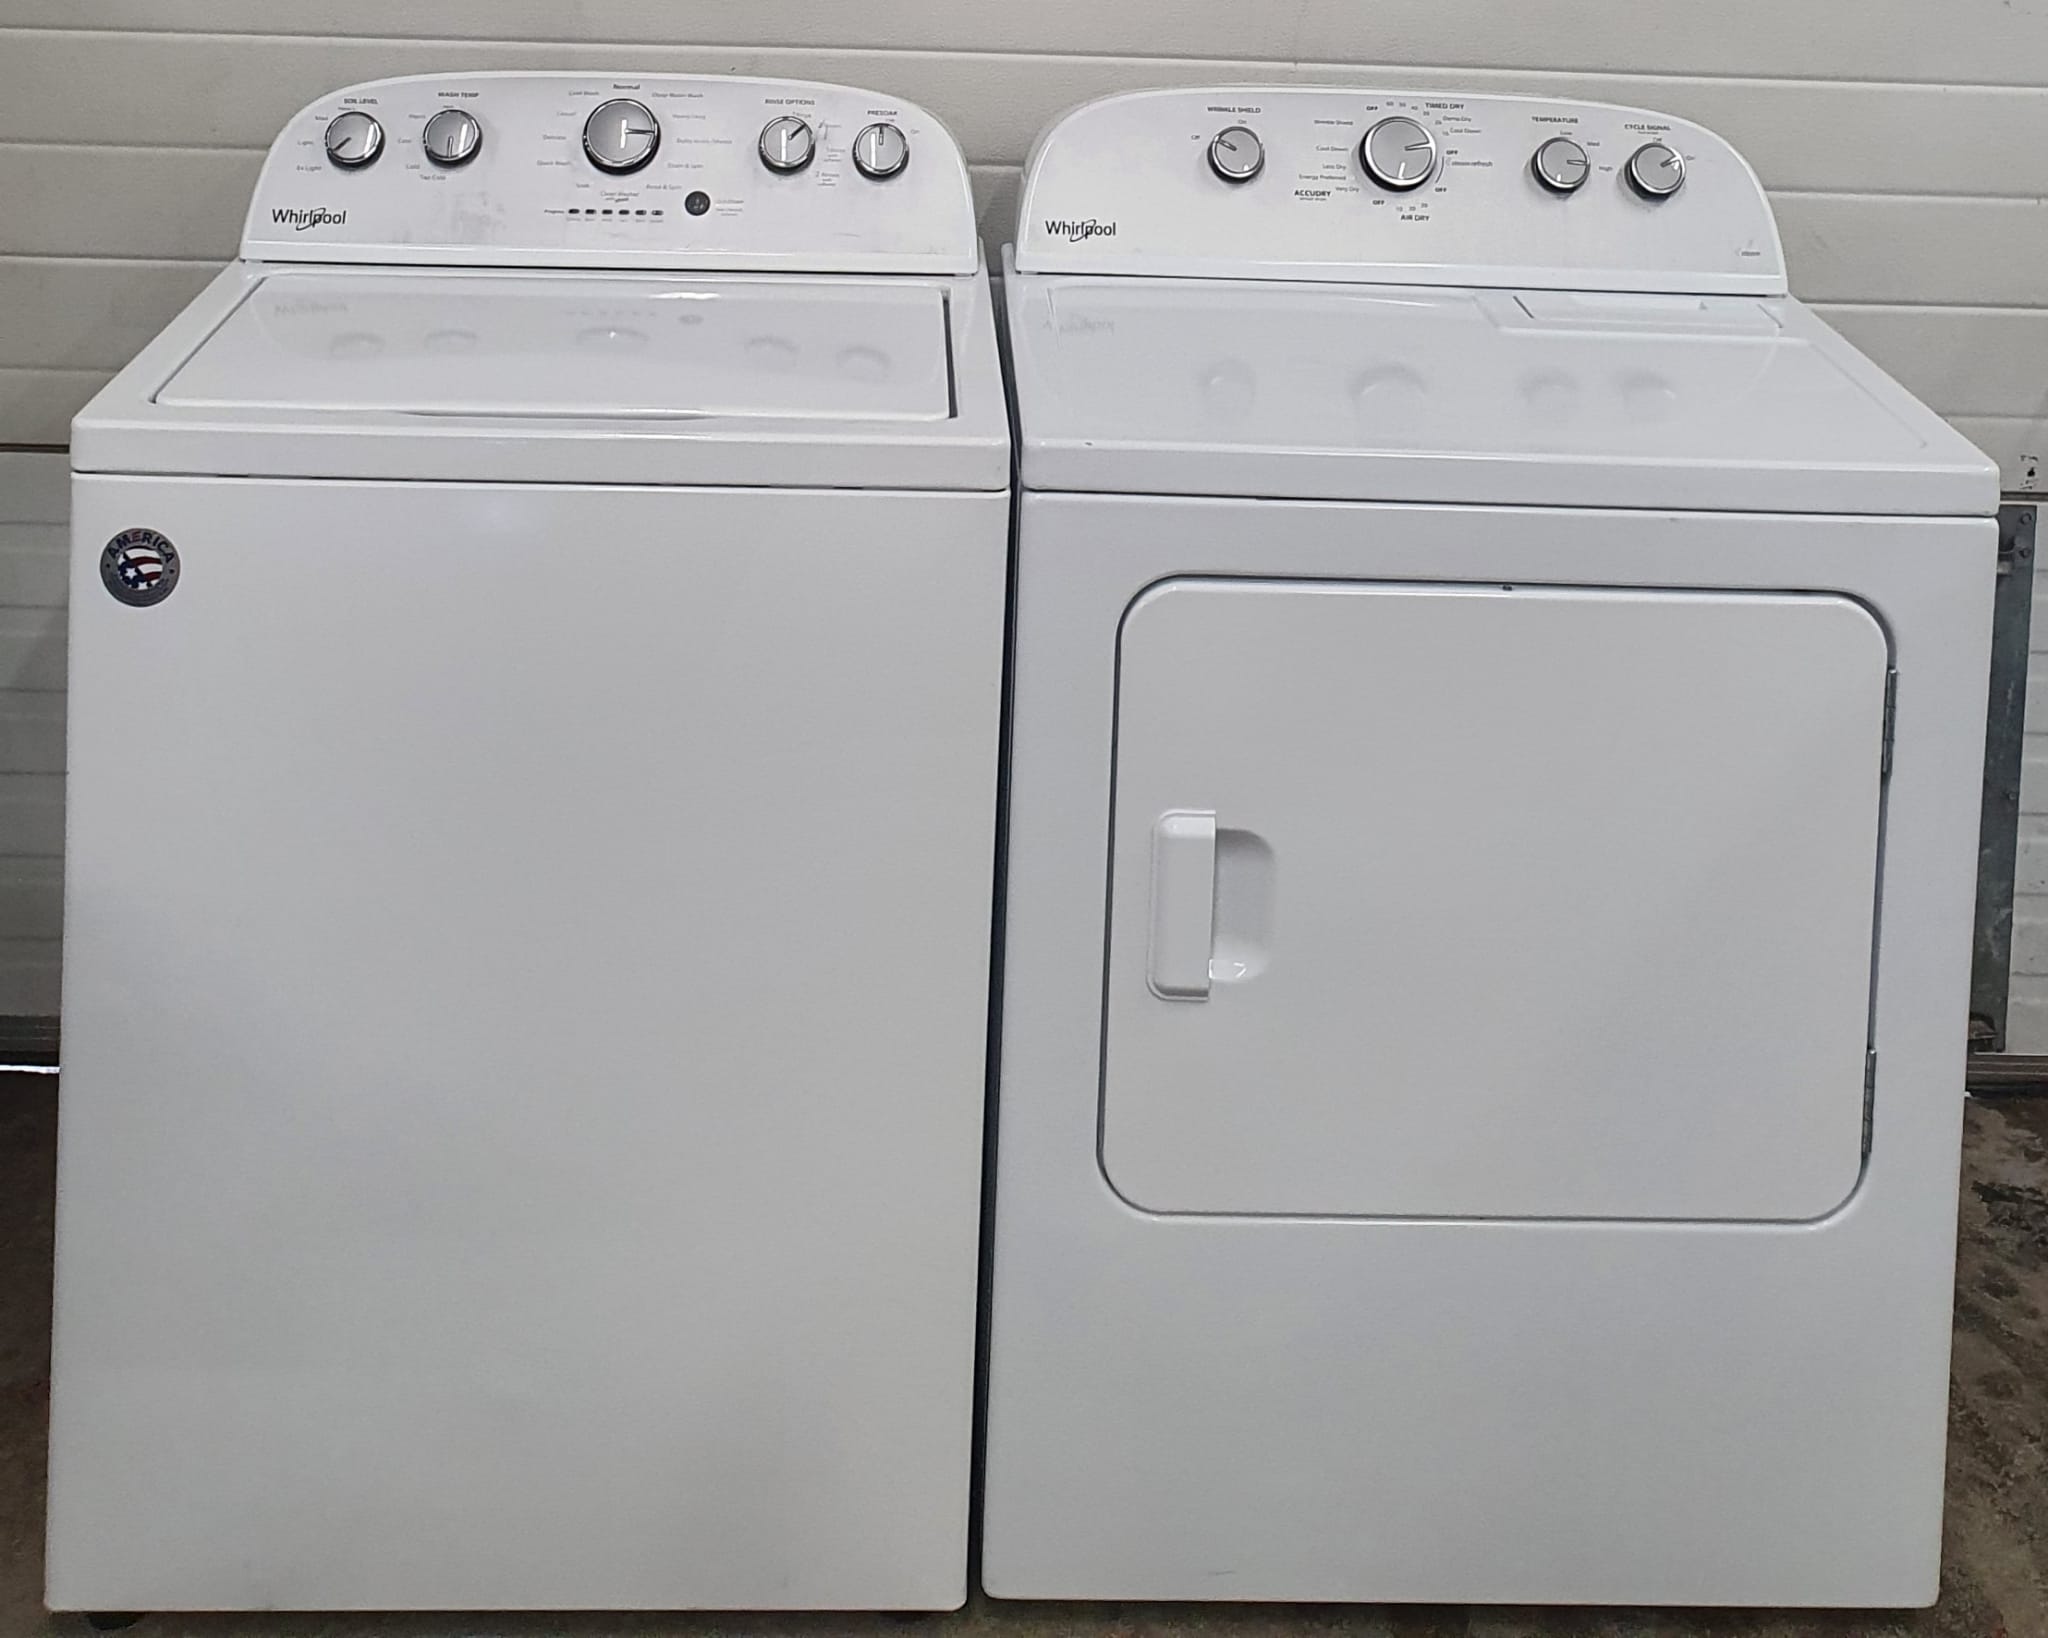 Order Your Used Whirlpool Set Washer WTW5000DW2 and Dryer YWED49STBW1 ...